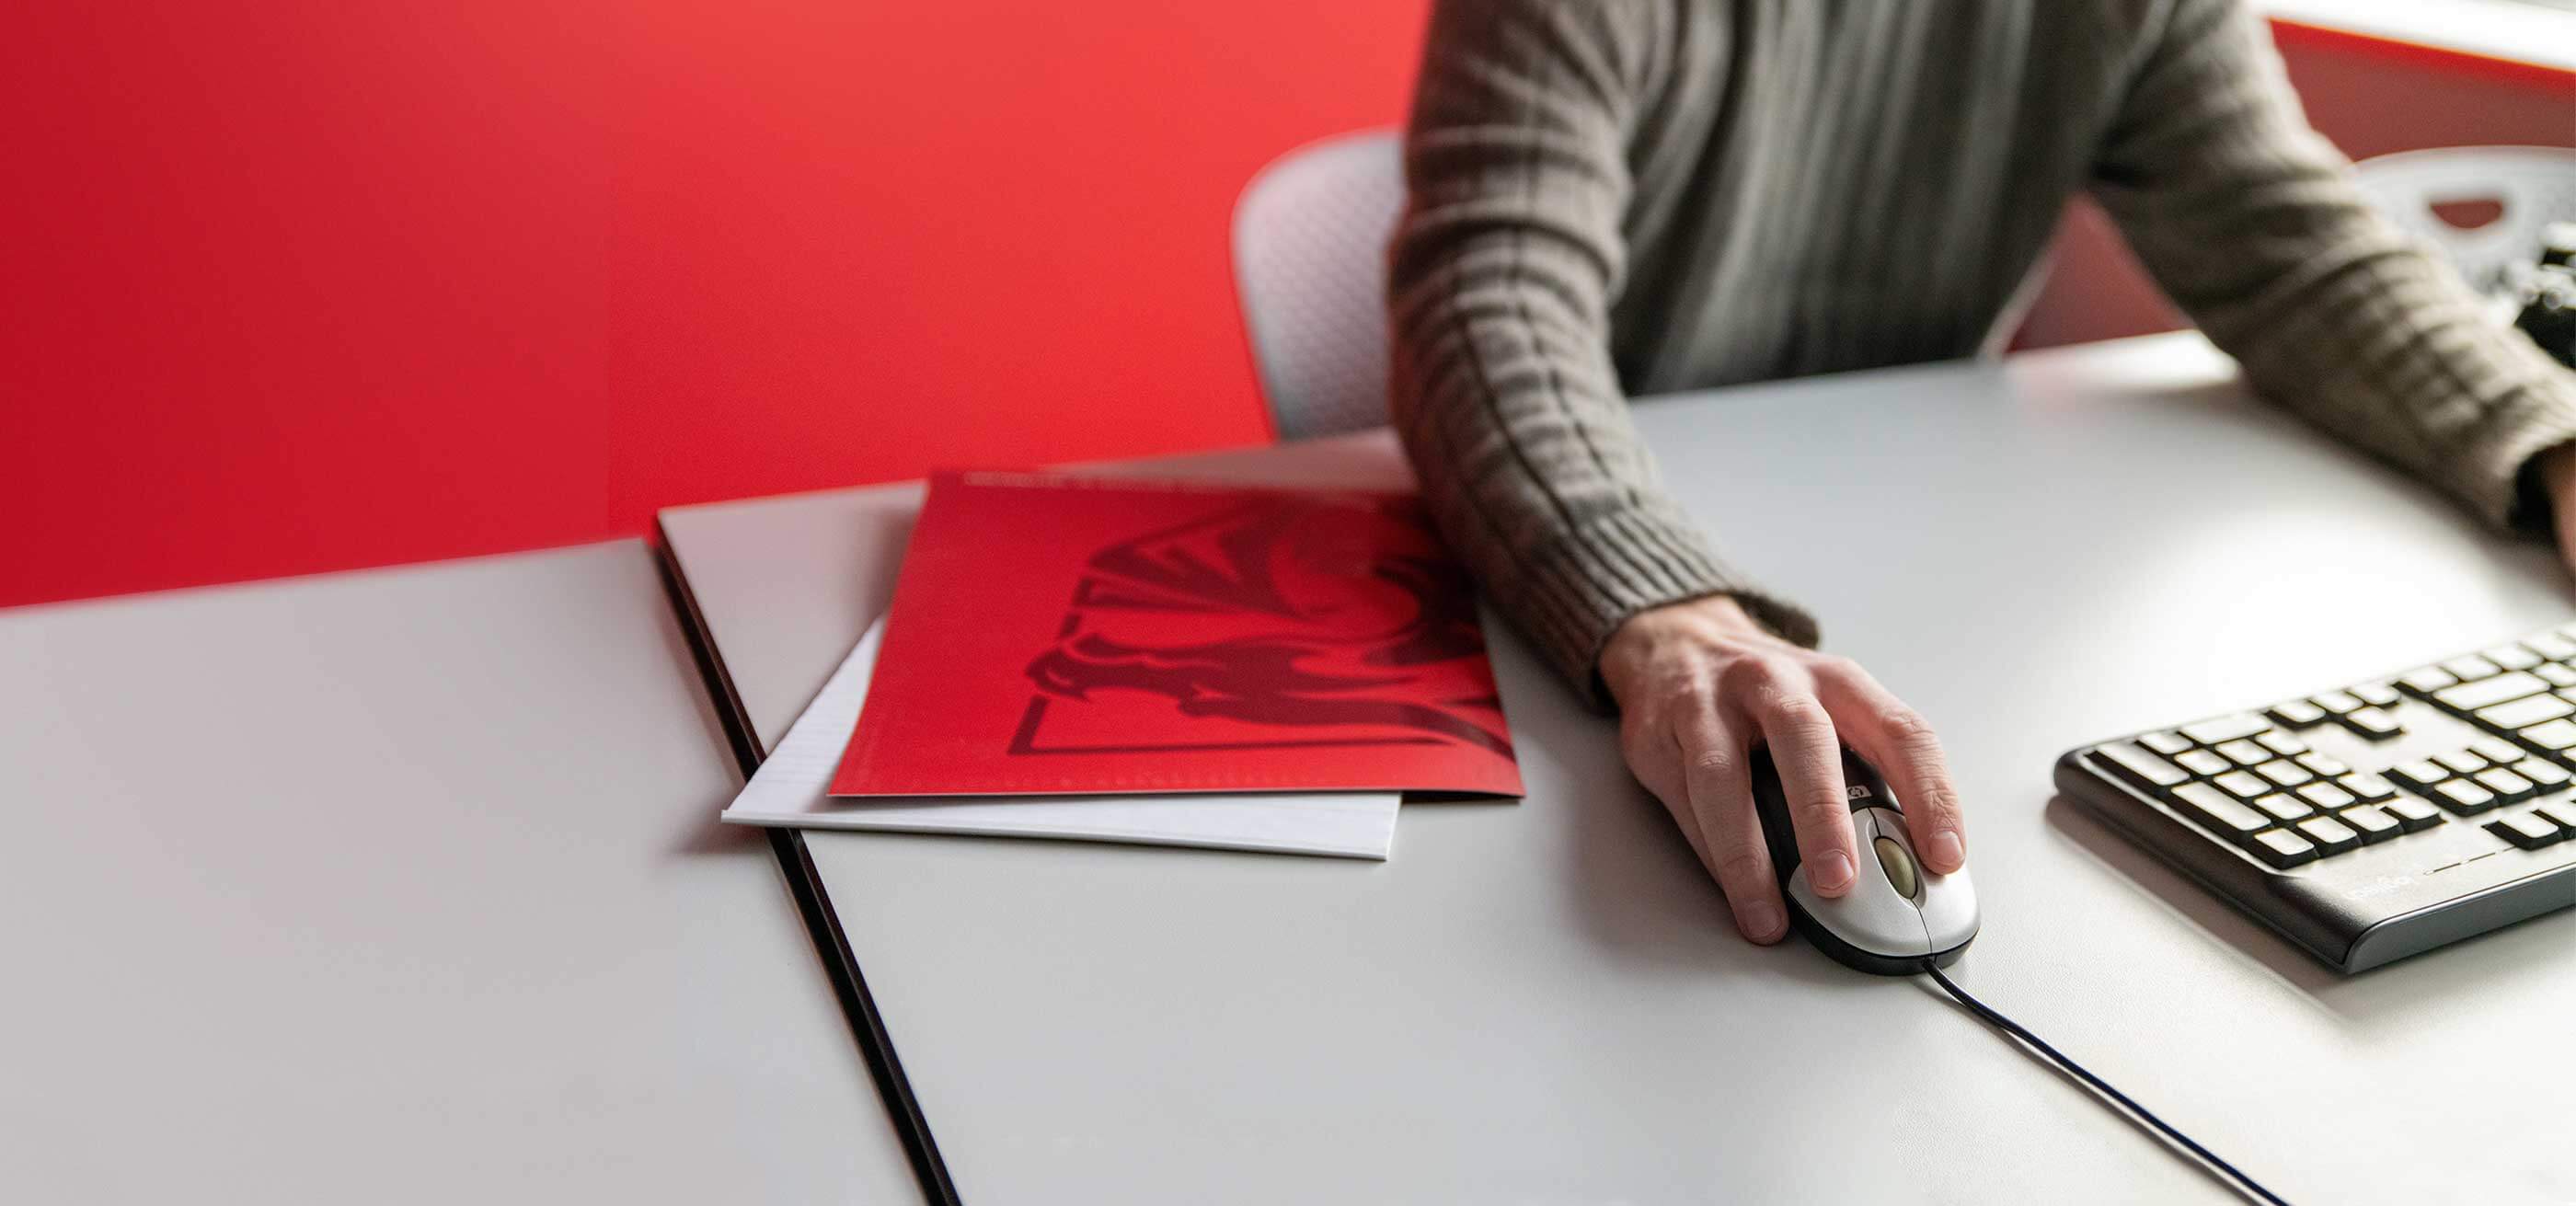 Angled view of a male faculty member using a mouse next to a DigiPen branded red folder.